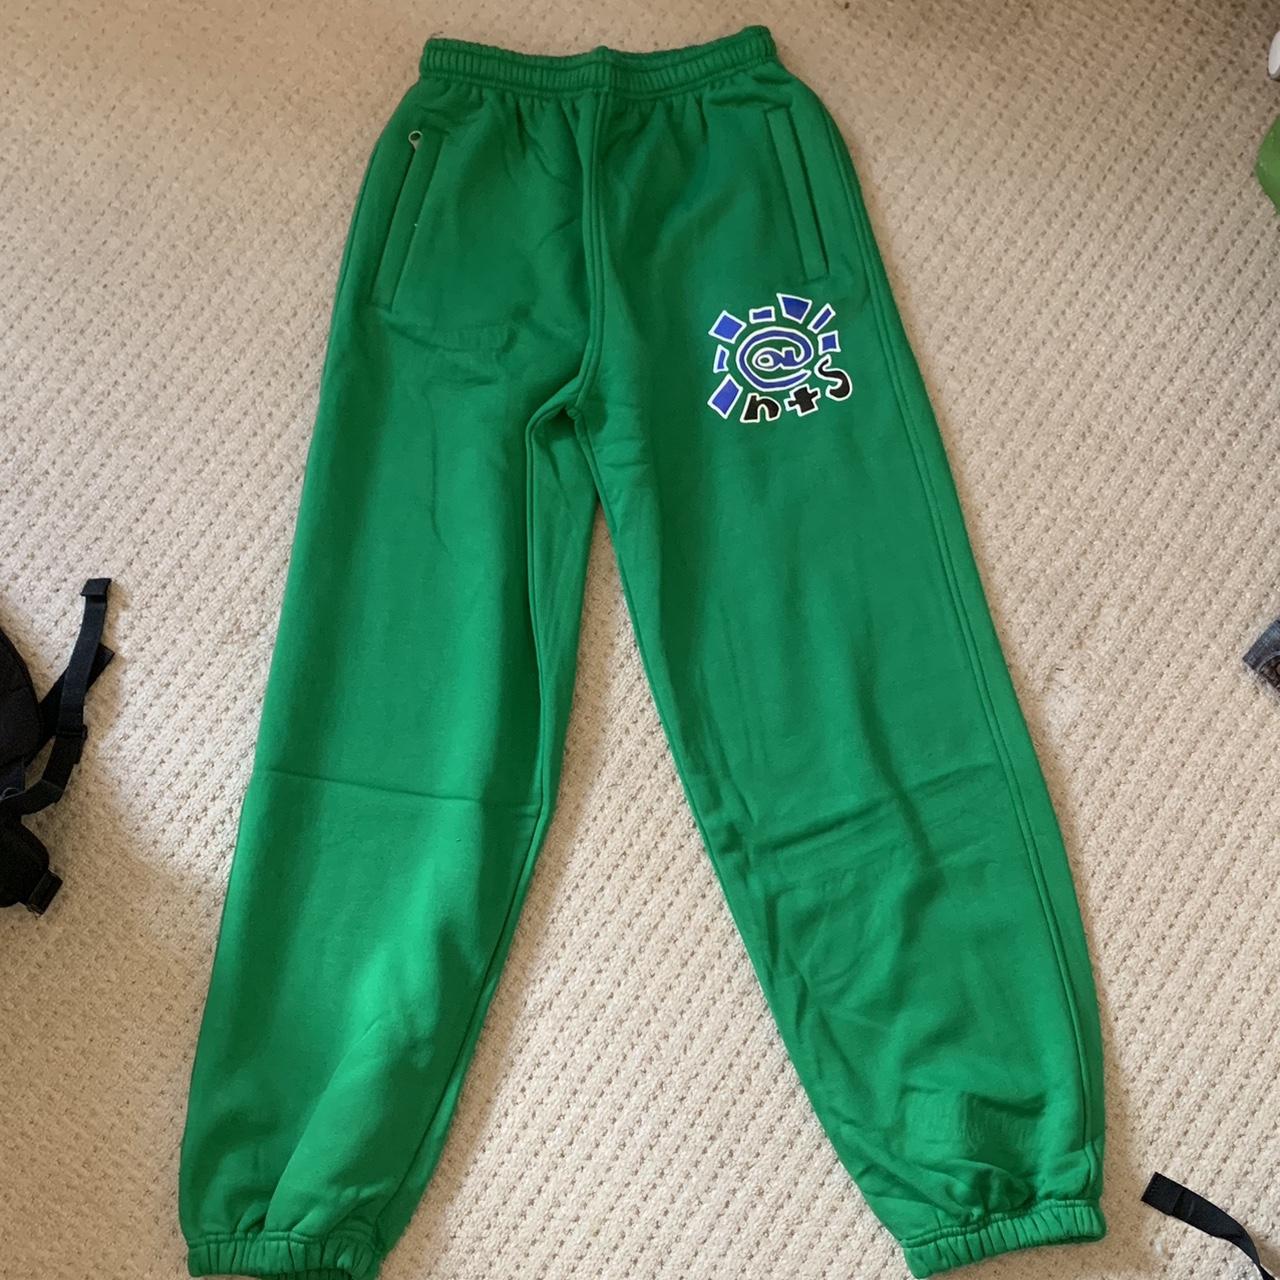 Always Do What You Should Do Men's Green and Blue Joggers-tracksuits ...